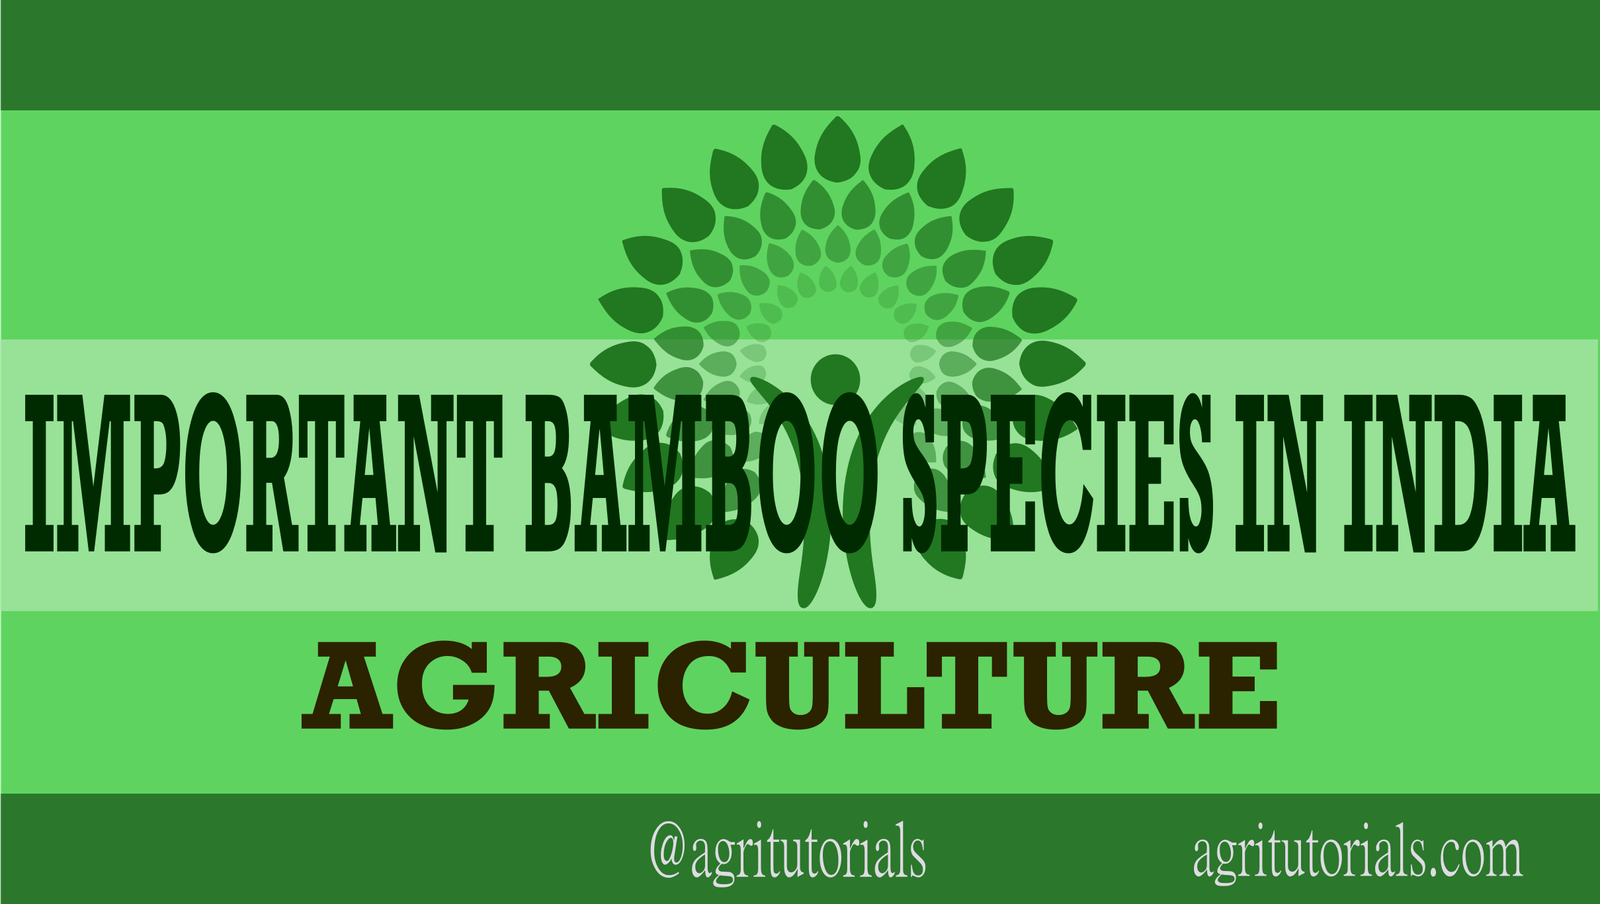 IMPORTANT BAMBOO SPECIES IN INDIA